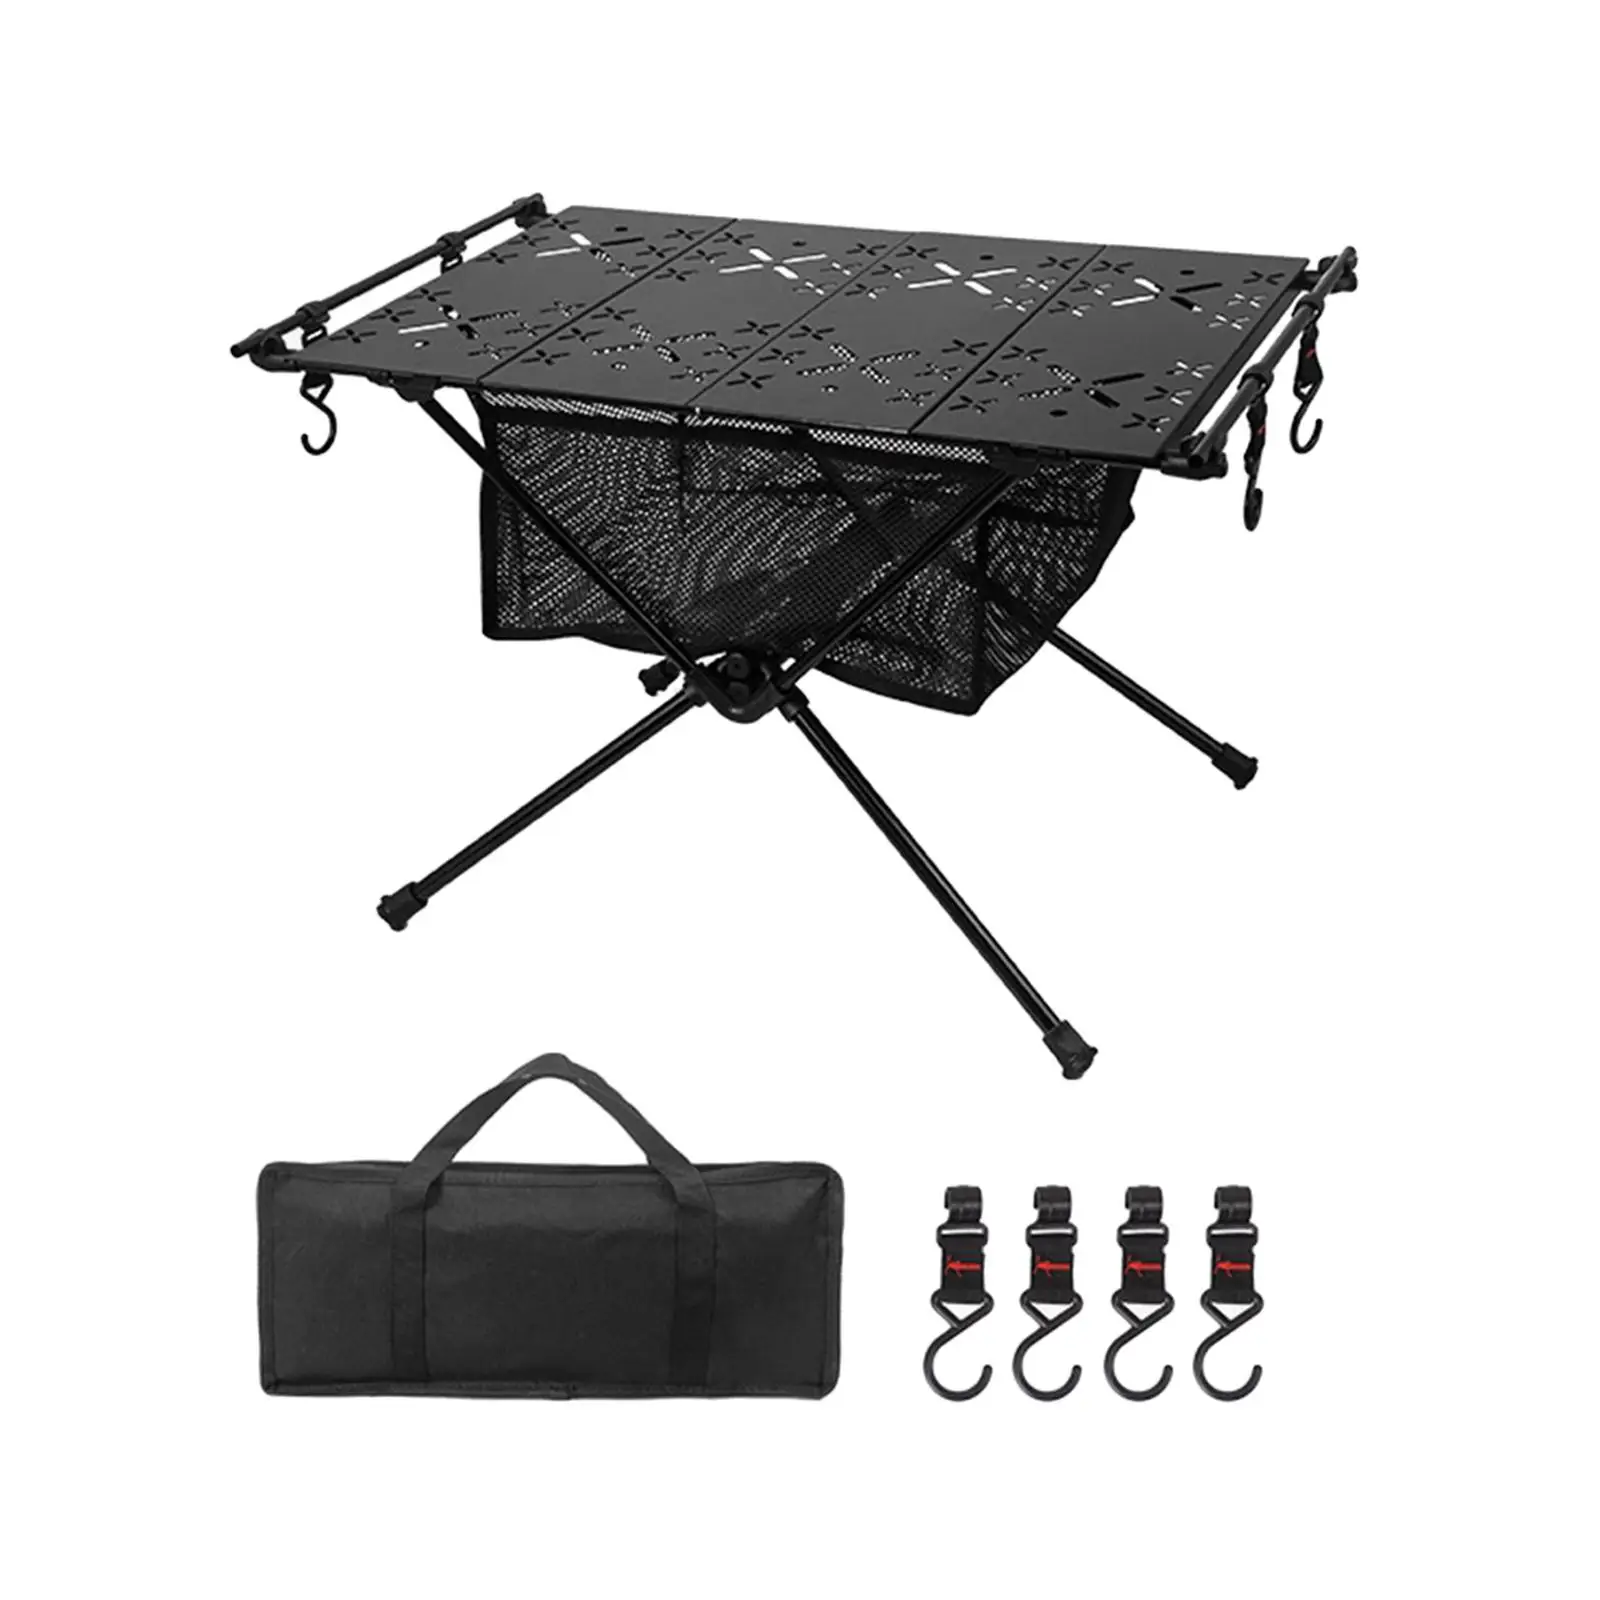 Foldable Camping Table Furniture Beach Table for Backyard Picnic Backpacking